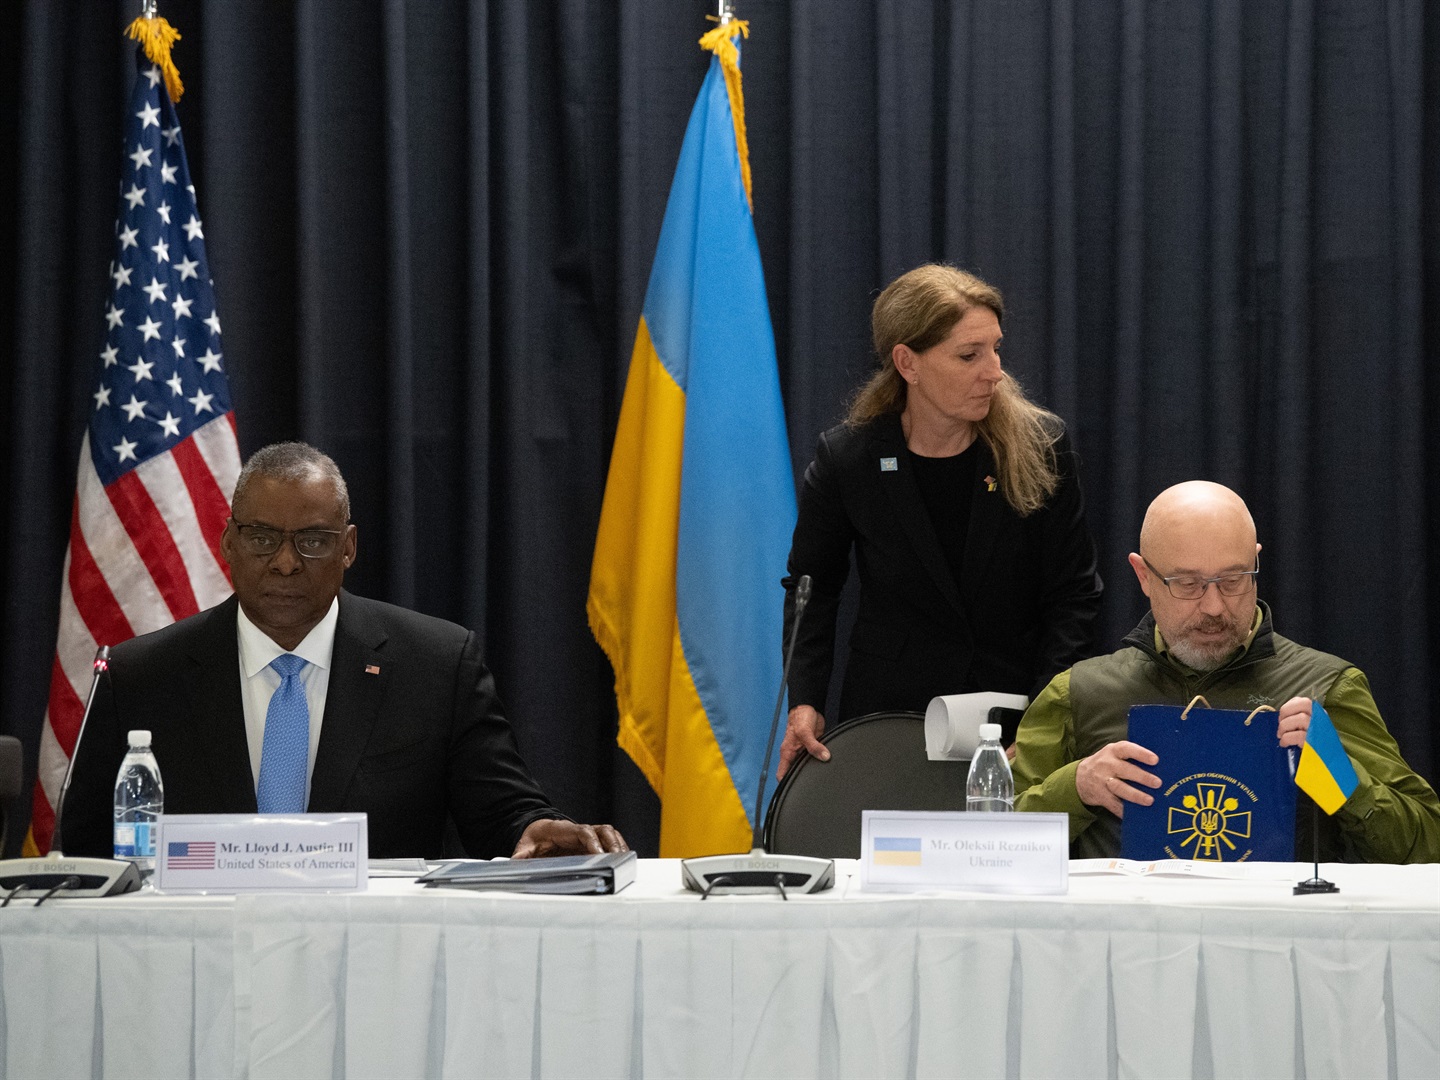 Rhineland-Palatinate, Ramstein: Lloyd Austin (l), U.S. Secretary of Defense, and Oleksiy Resnikov, Minister of Defense of Ukraine, at a conference on the Ukraine war at Ramstein Air Base on April 26, 2022. Photo by Boris Roessler/picture alliance via Getty Images